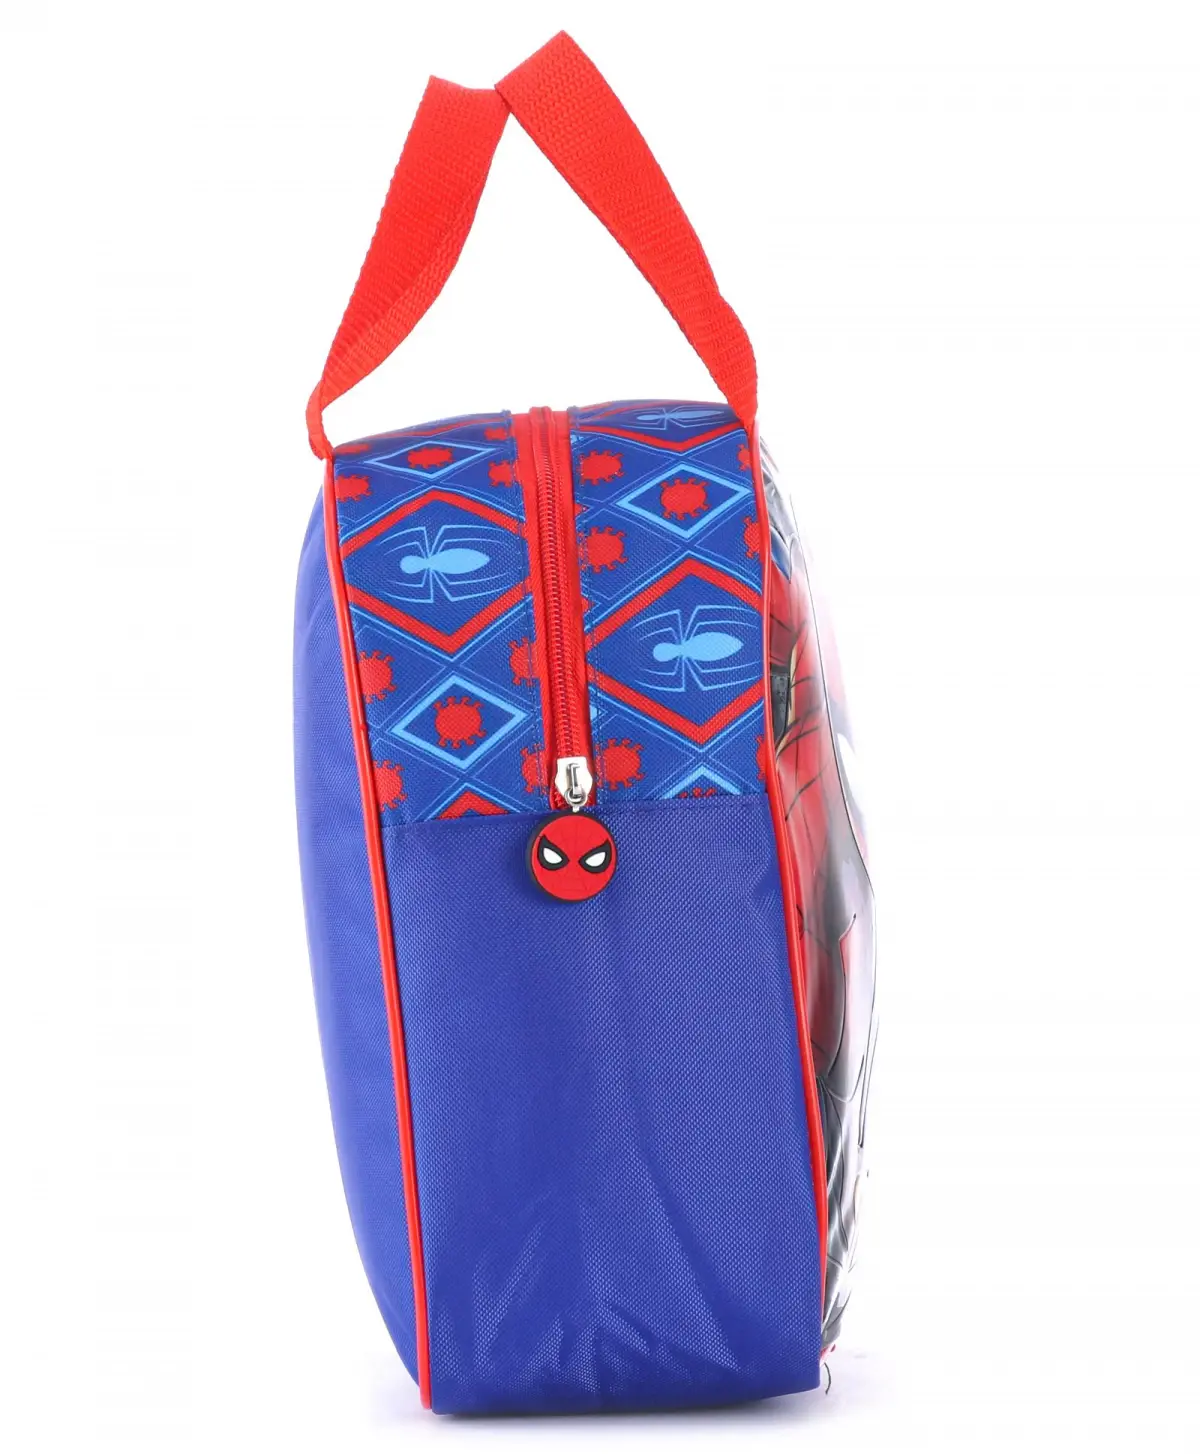 Striders Spiderman Lunch Bag ??? Insulated Marvel Hero Lunch Tote for Kids, 3Y+, Multicolour